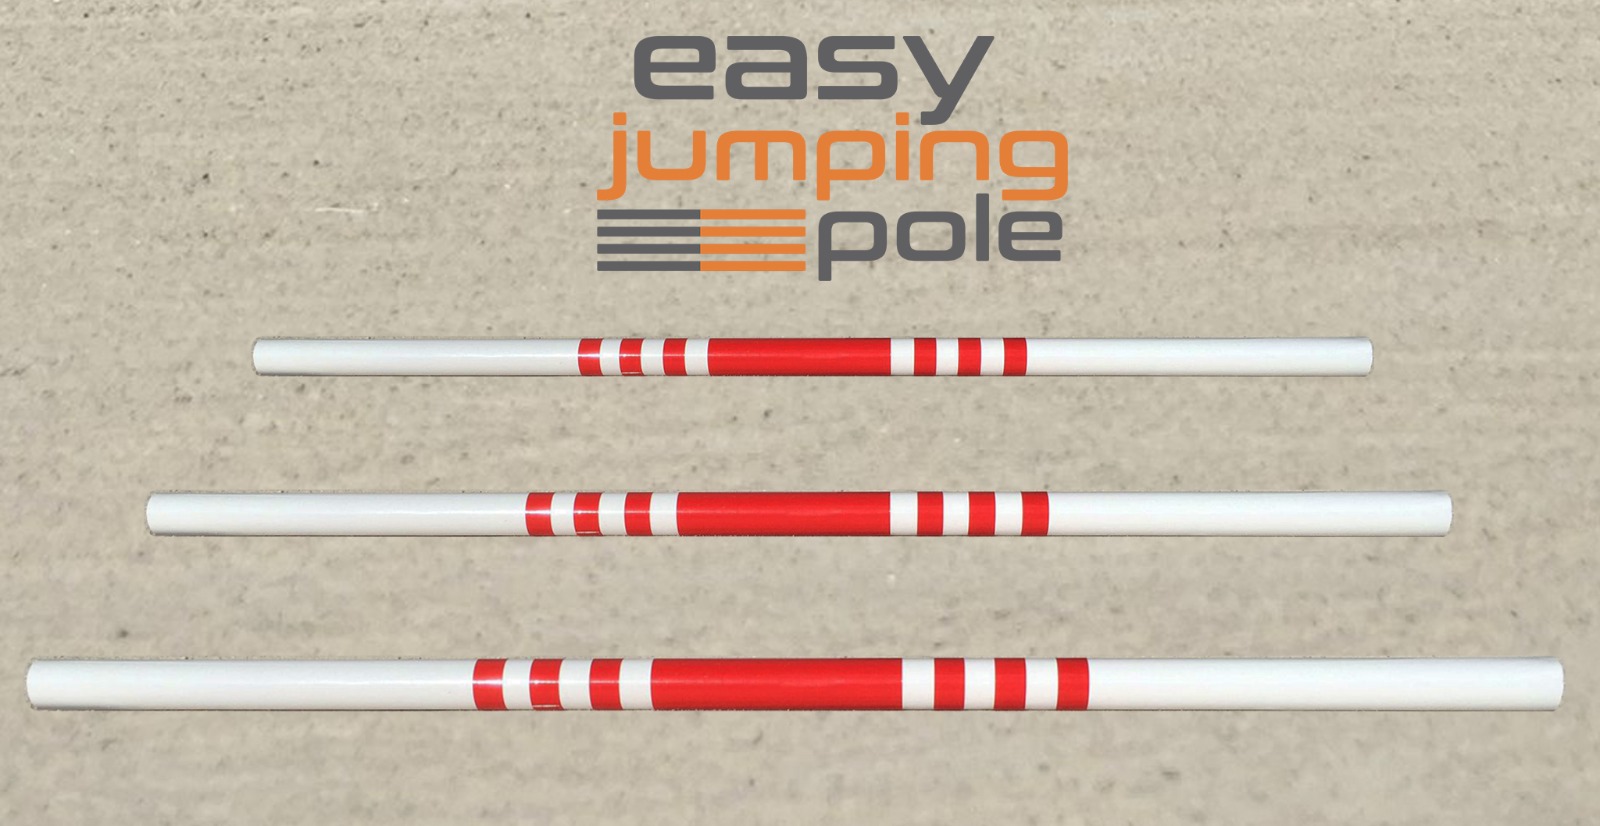 Easy jumping pole Model F-2